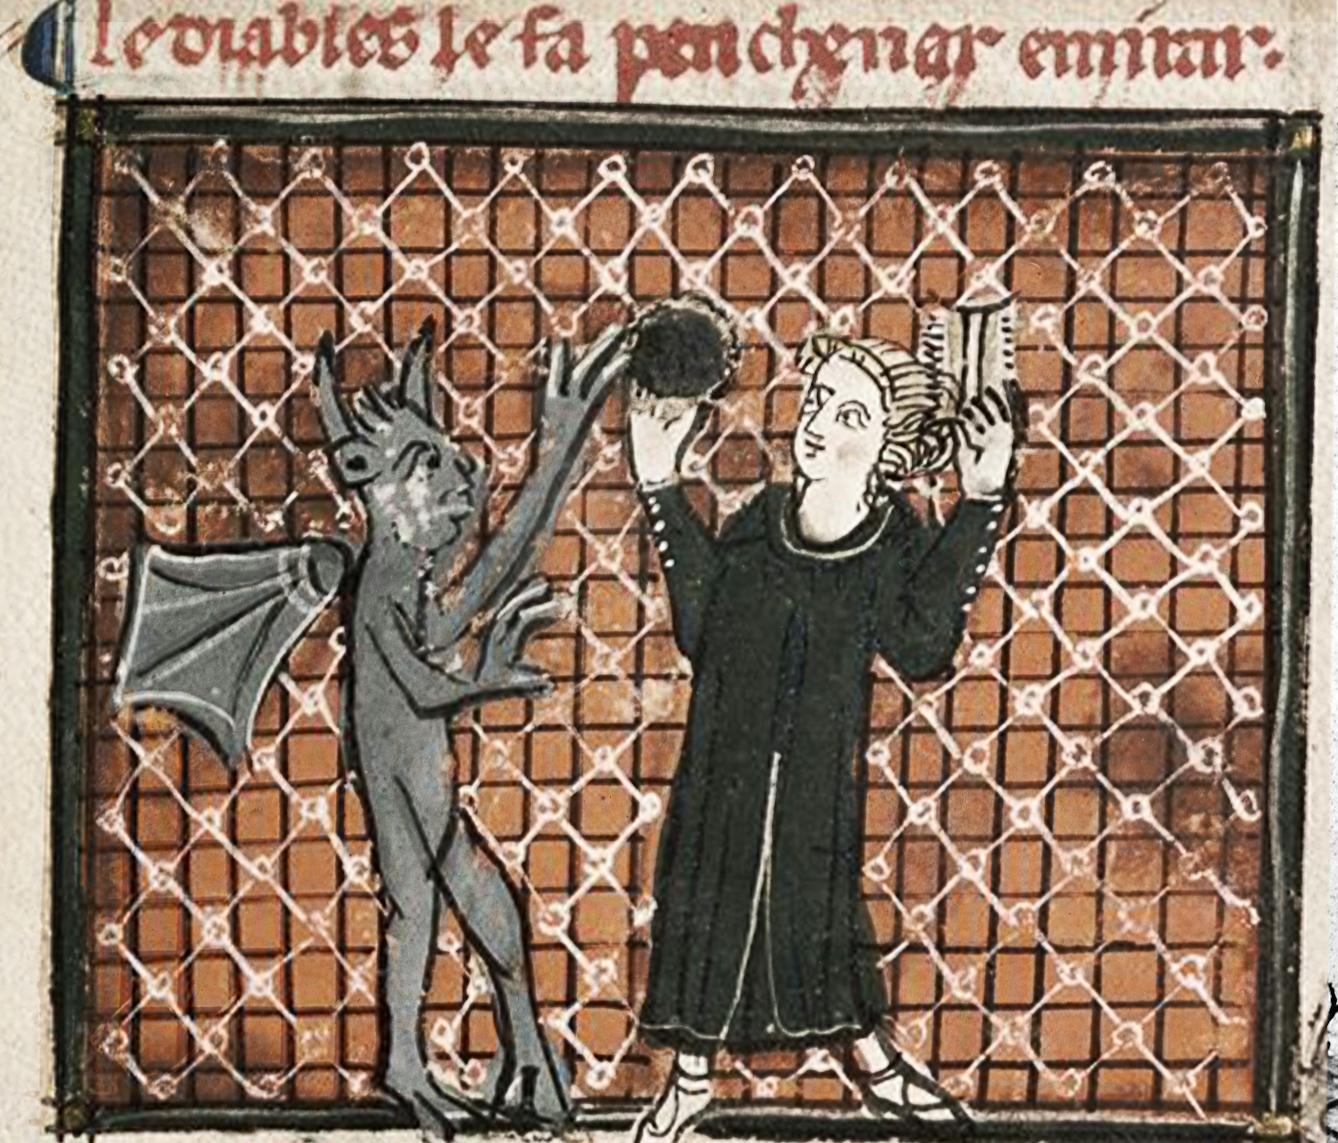 Manuscript image showing a devil tempting a woman through flattery as she gazes into a mirror and combs her hair.